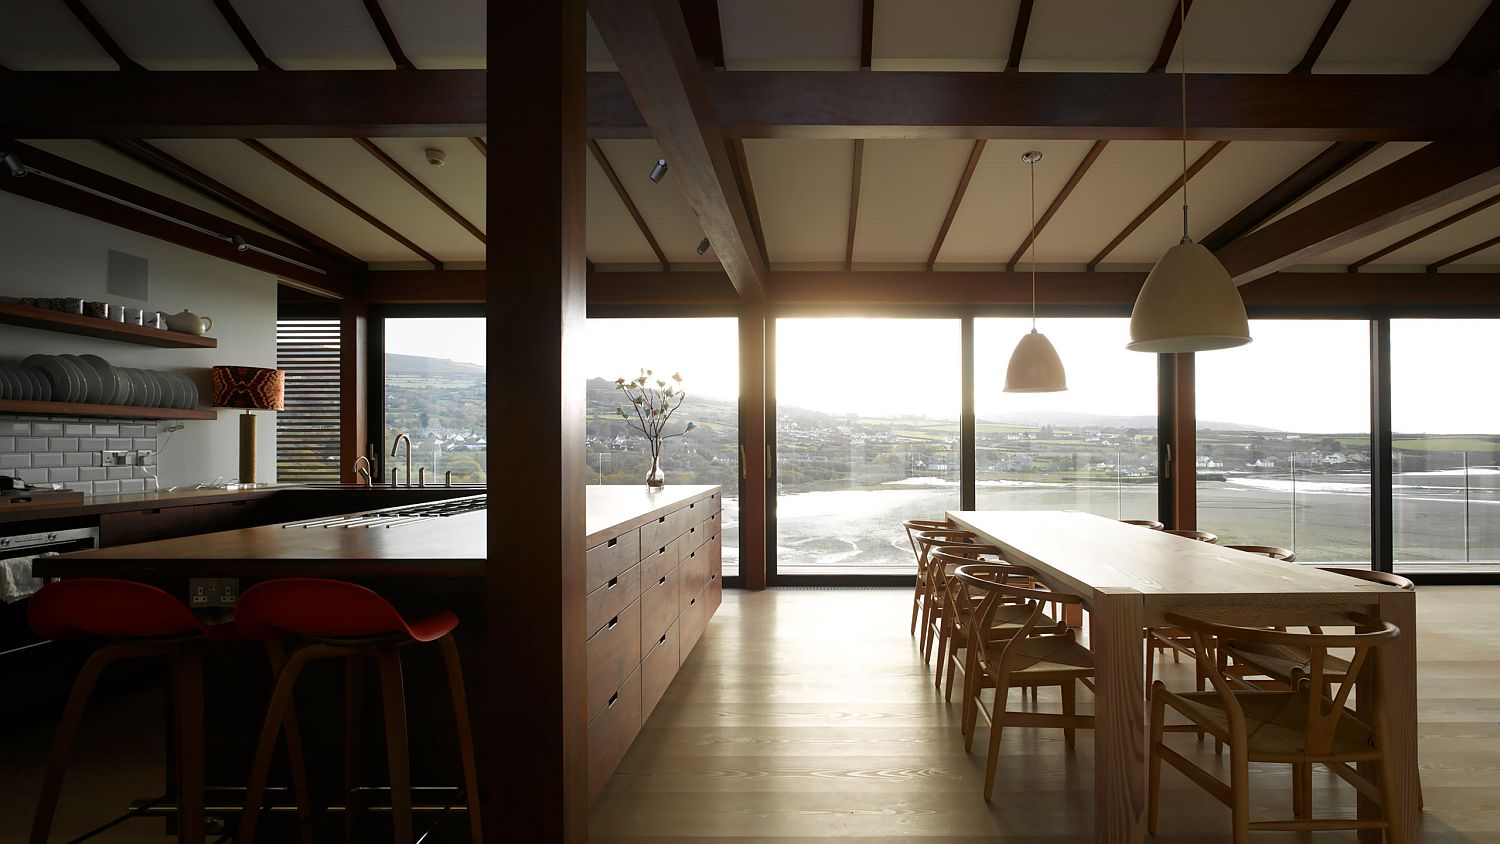 Wooden-beams-shape-the-ceiling-in-the-kitchen-and-dining-area